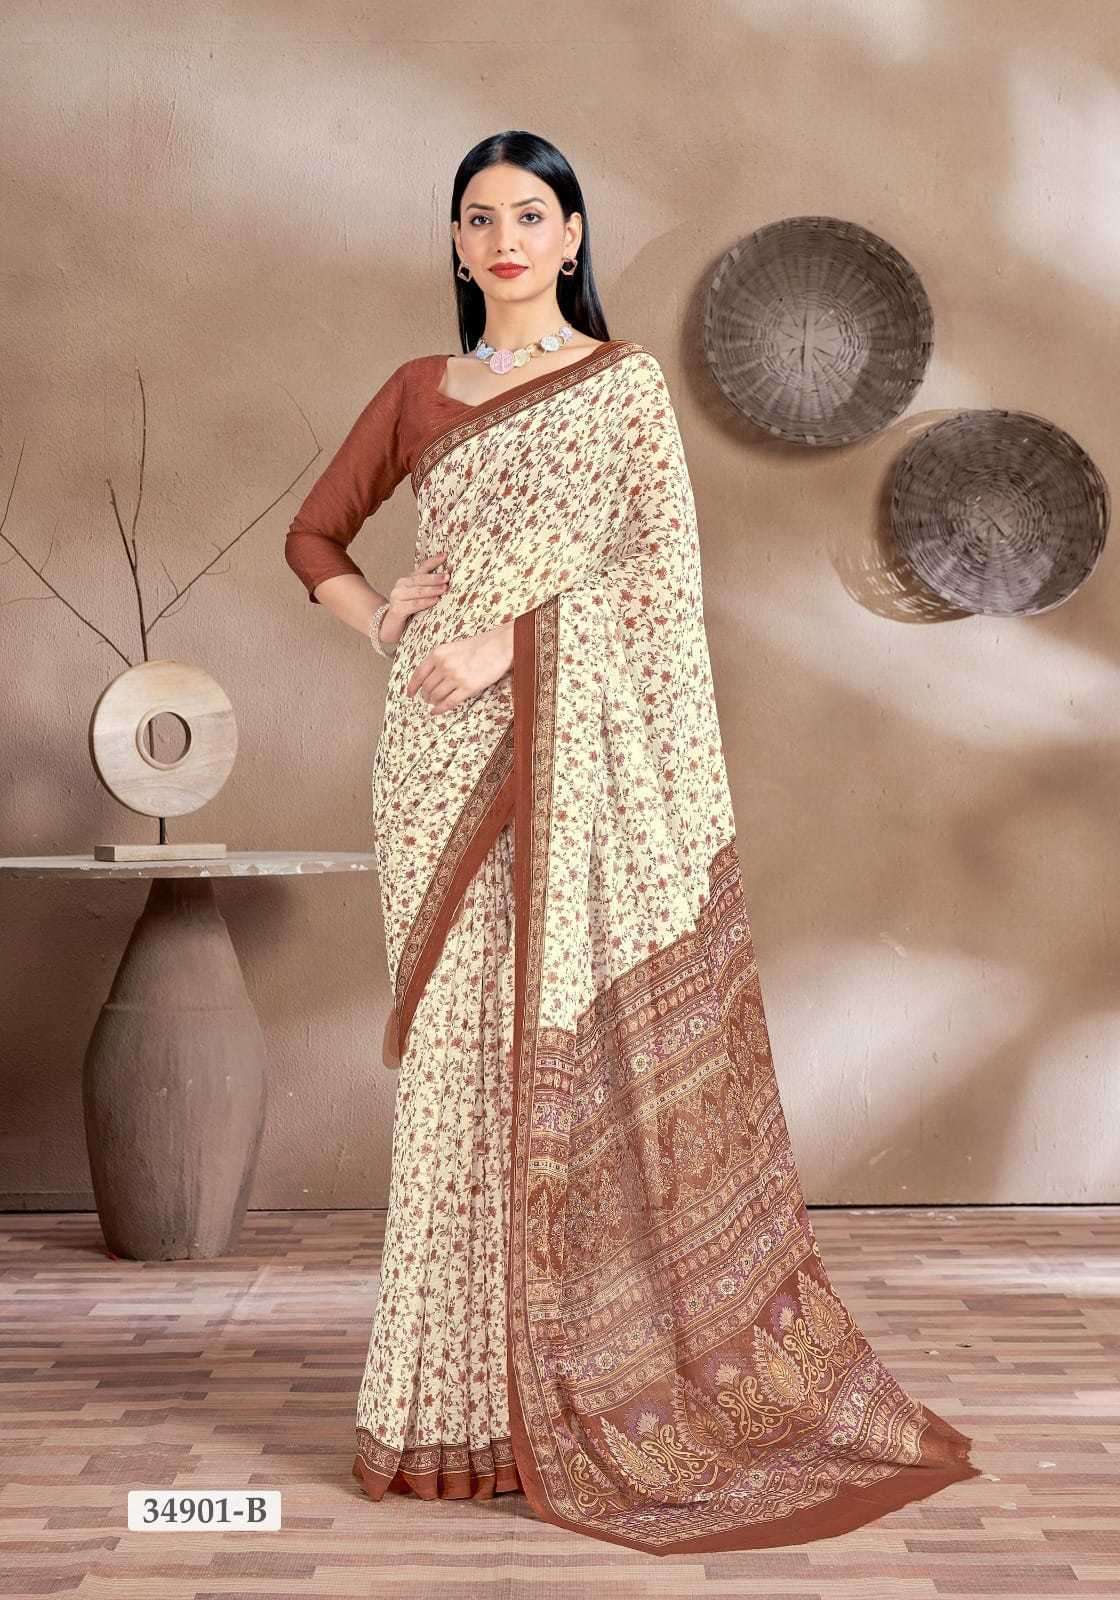 STAR CHIFFON SERIES 34901 TO 34903 SAREE BY RUCHI DESIGNER WITH PRINTED CHIFFONE SAREES ARE AVAILABLE AT WHOLESALE PRICE